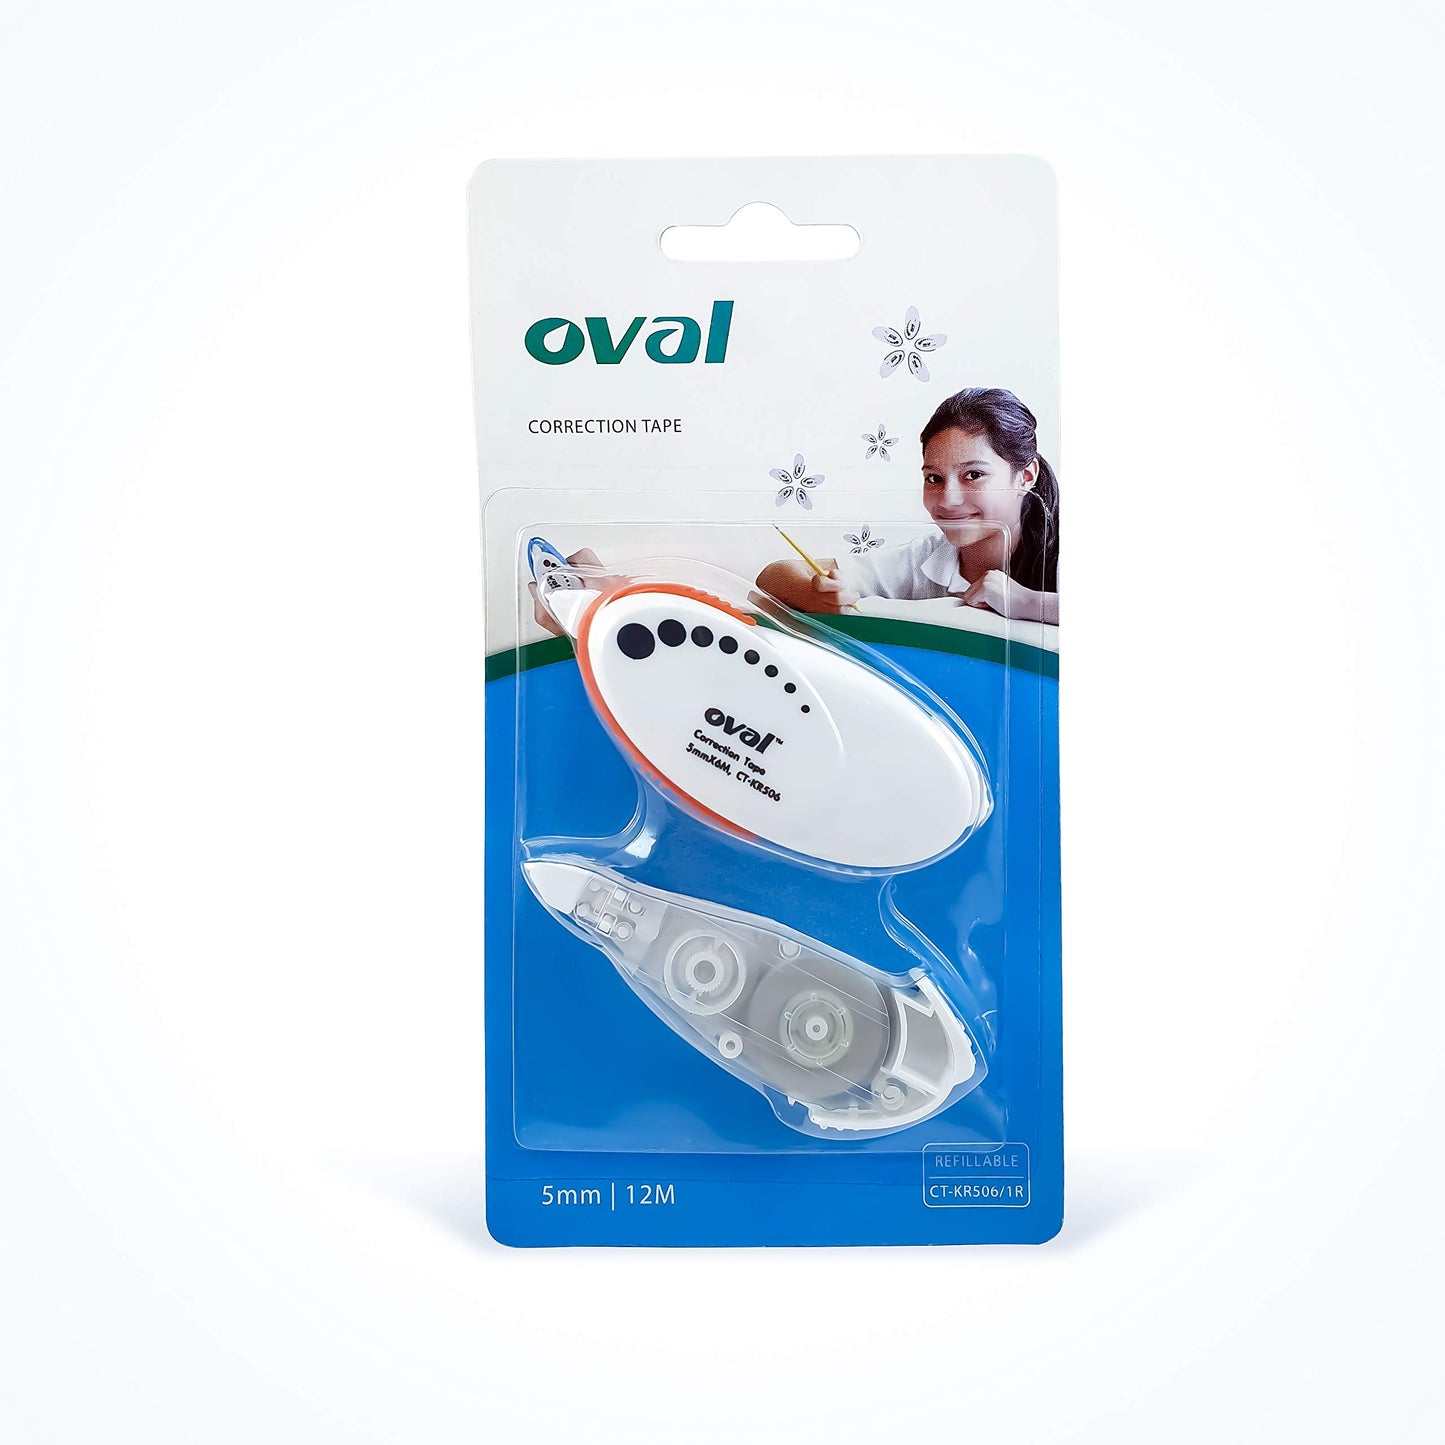 OVALCORRECTION TAPE 5MM X 12M + 1REFILL IN A BLISTER CARD, WHITE, CTKR506/1R